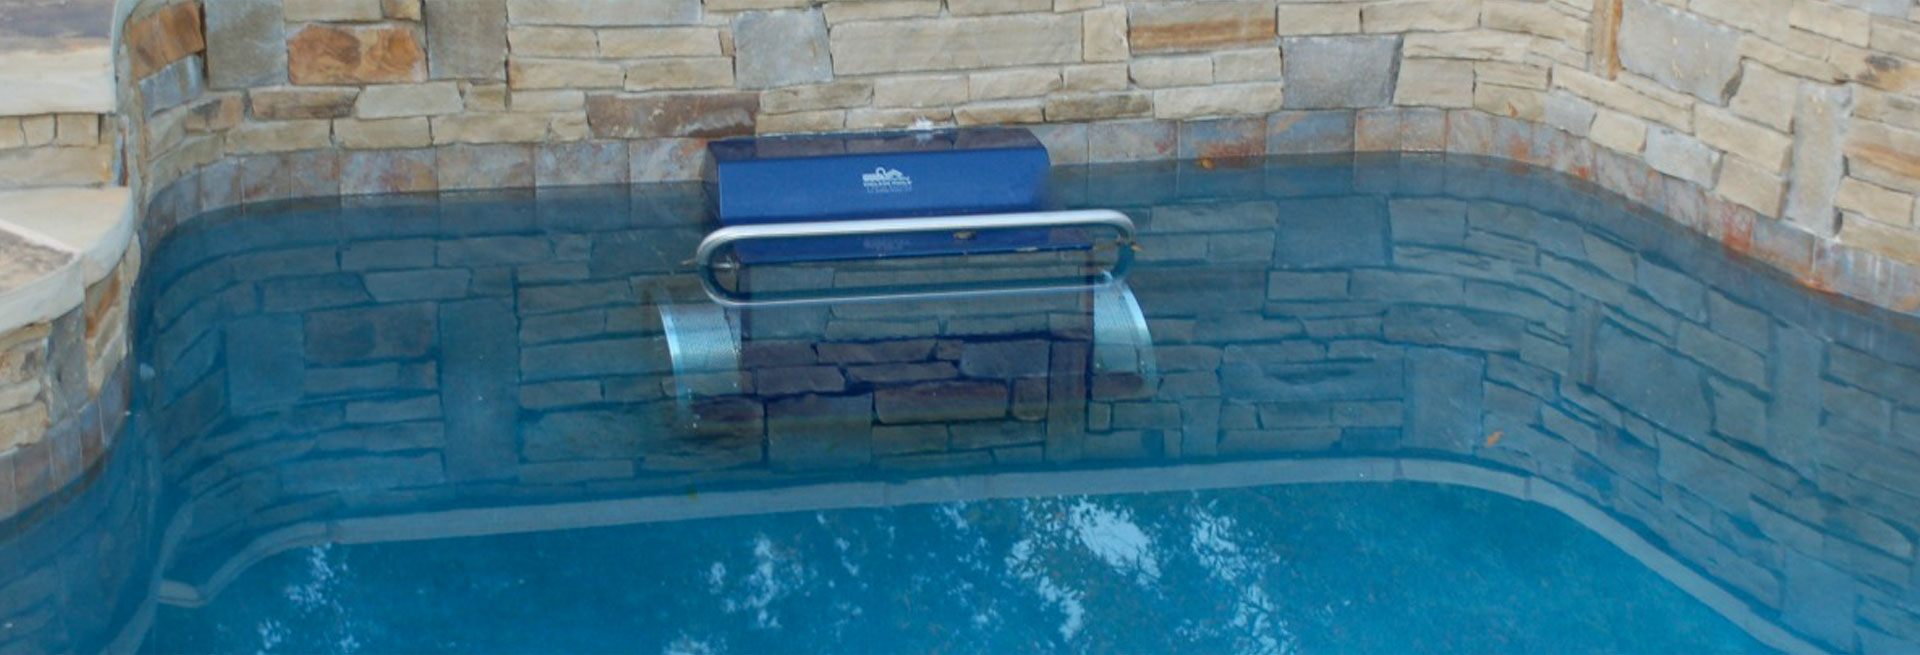 What Can a Fastlane Pro Do For My Swimming Pool? Lap Pools for Sale Near Sioux Falls